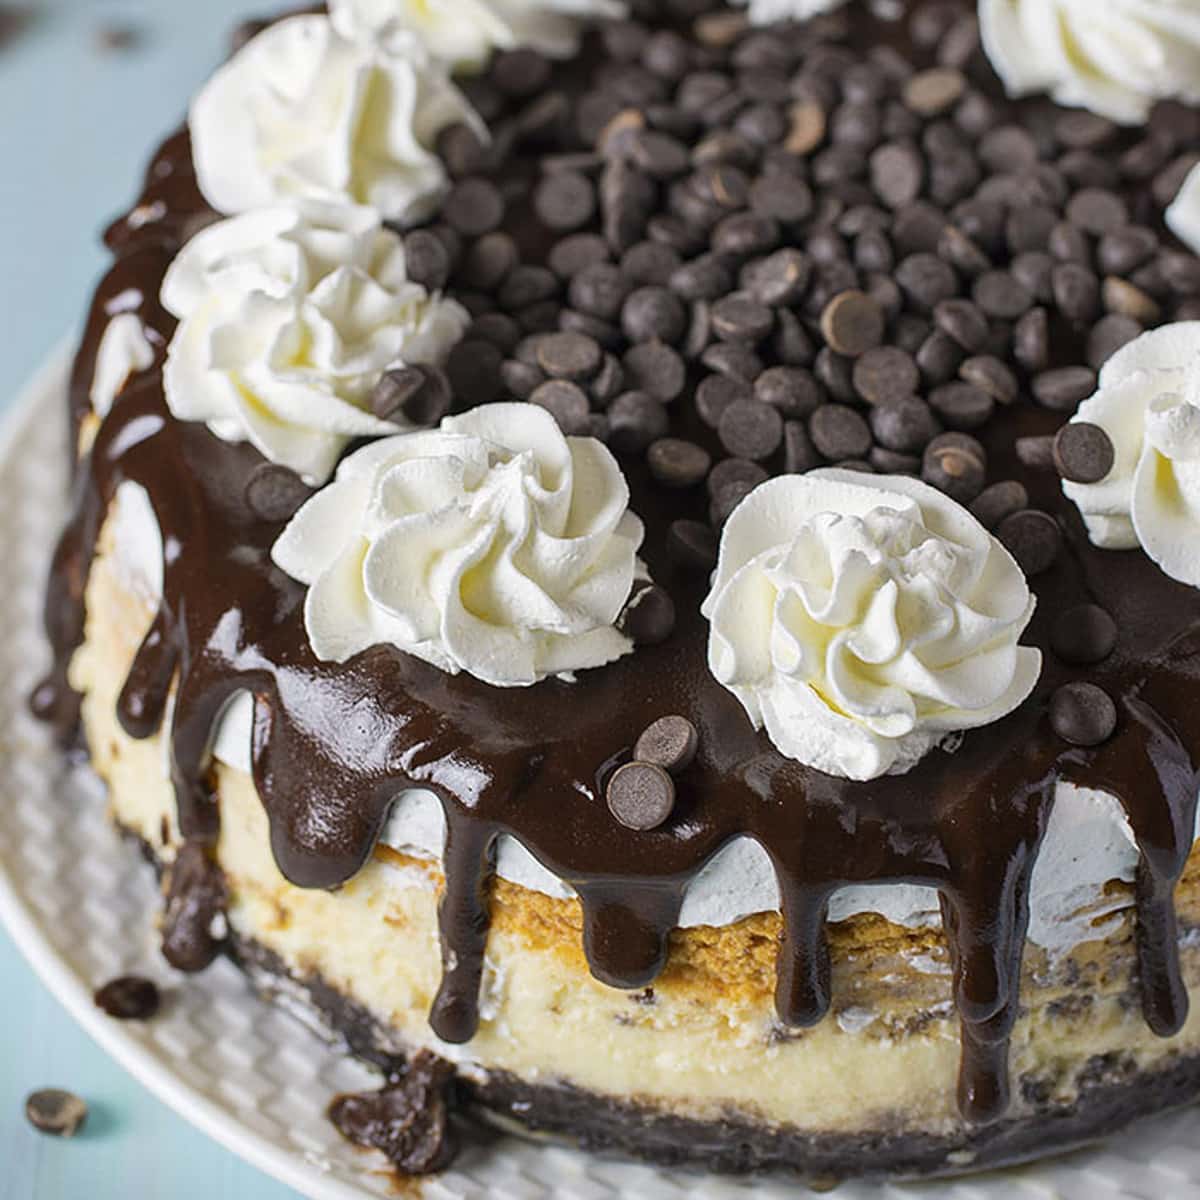 Pumpkin Recipes - Double layer pumpkin cheesecake topped with a chocolate ganache, chocolate chips, and whipped cream.